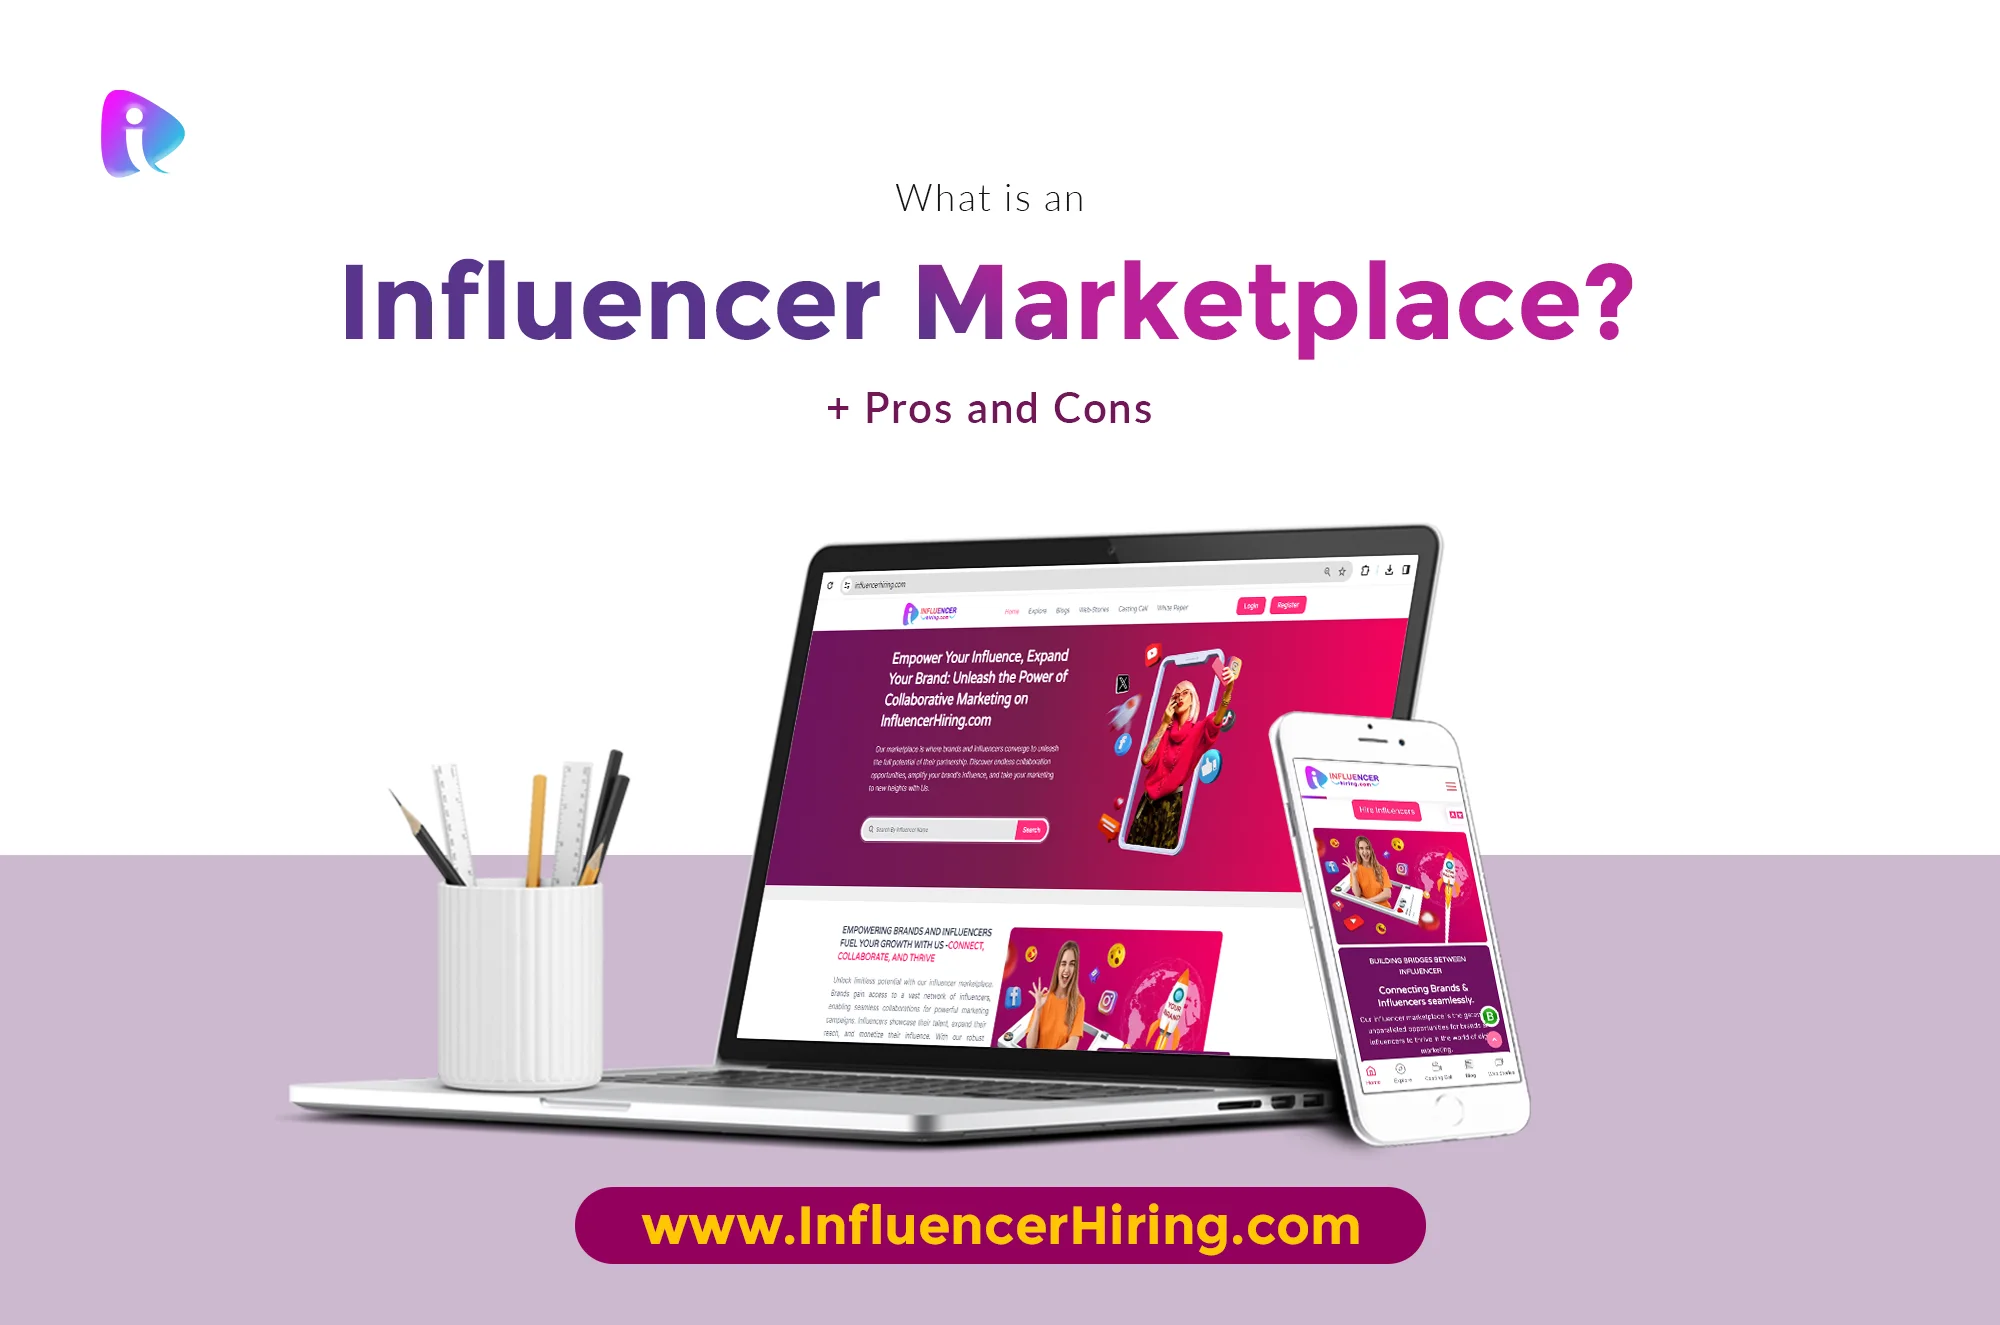 What is an Influencer Marketplace? + Advantages and Challenges